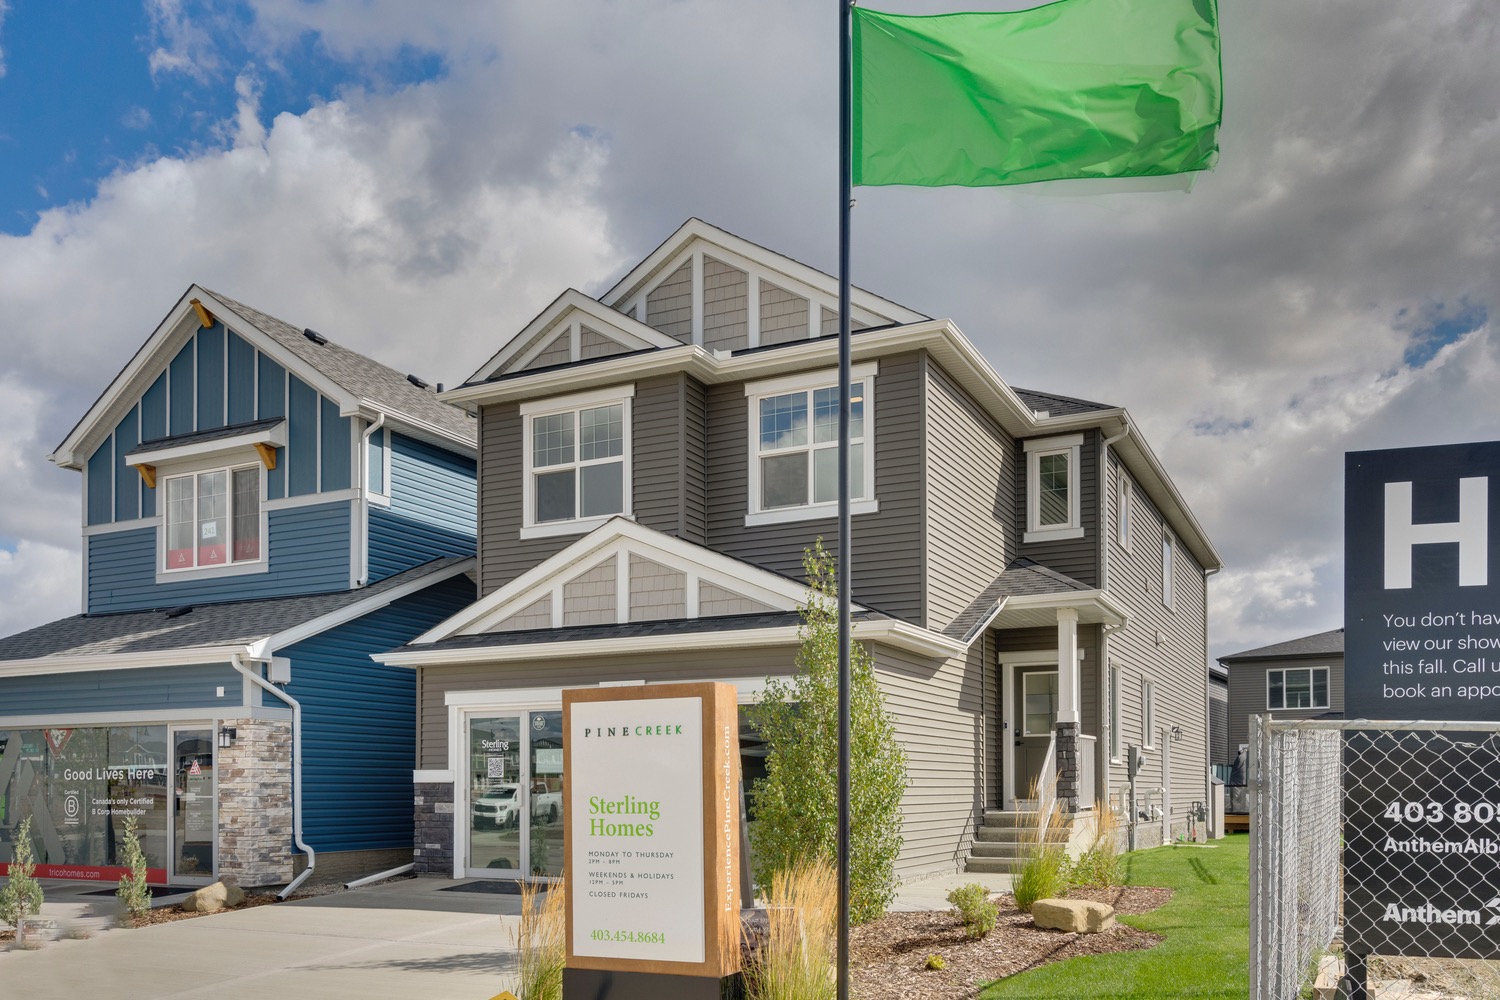 The Denali 6 showhome in the community of Pinecreek.